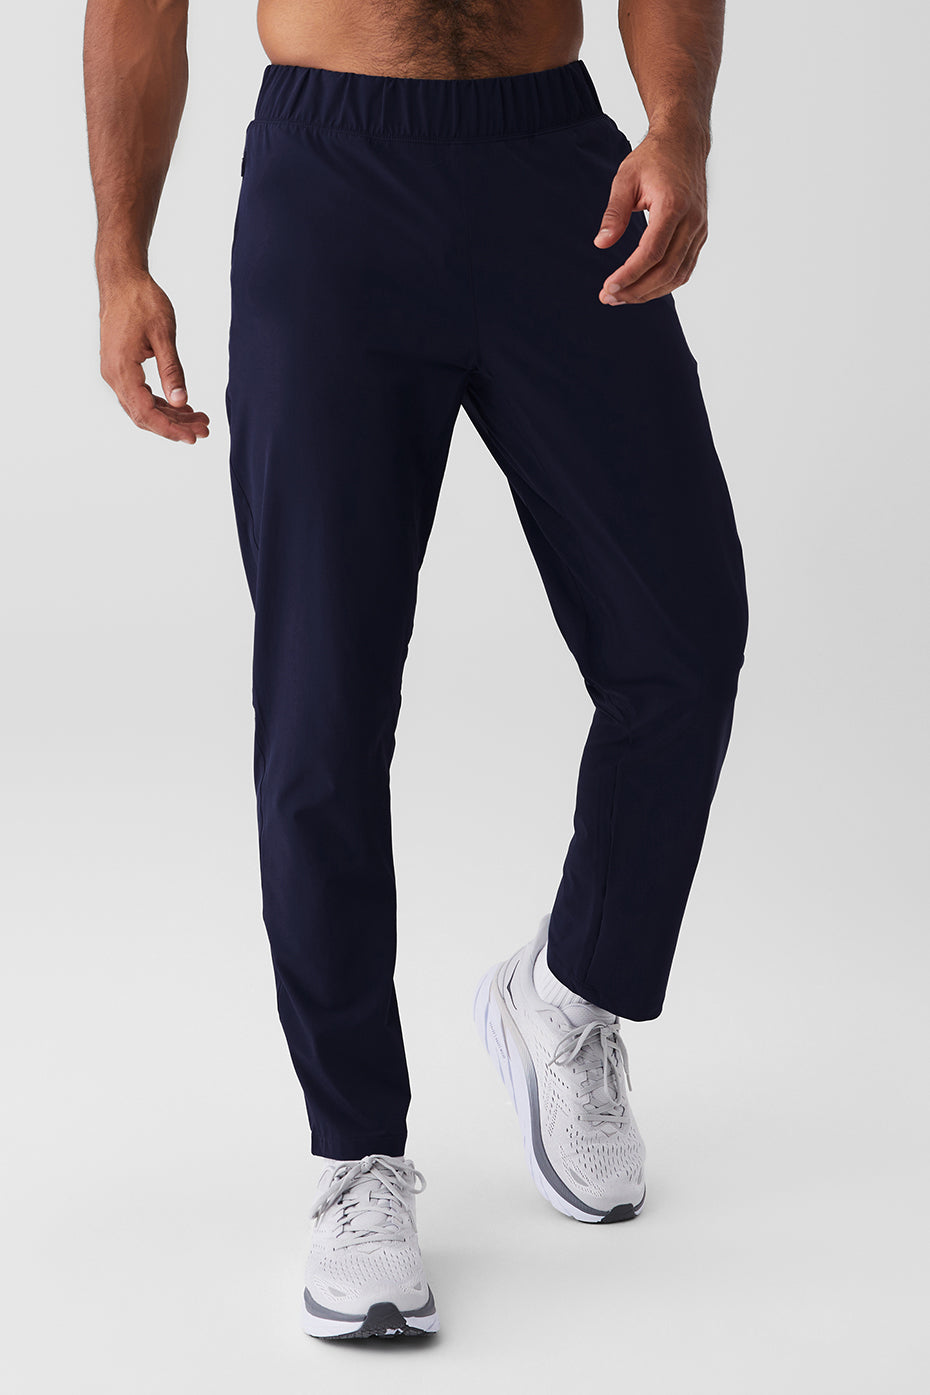 Triumph Sweatpant - True Navy – THE LUXEWELL